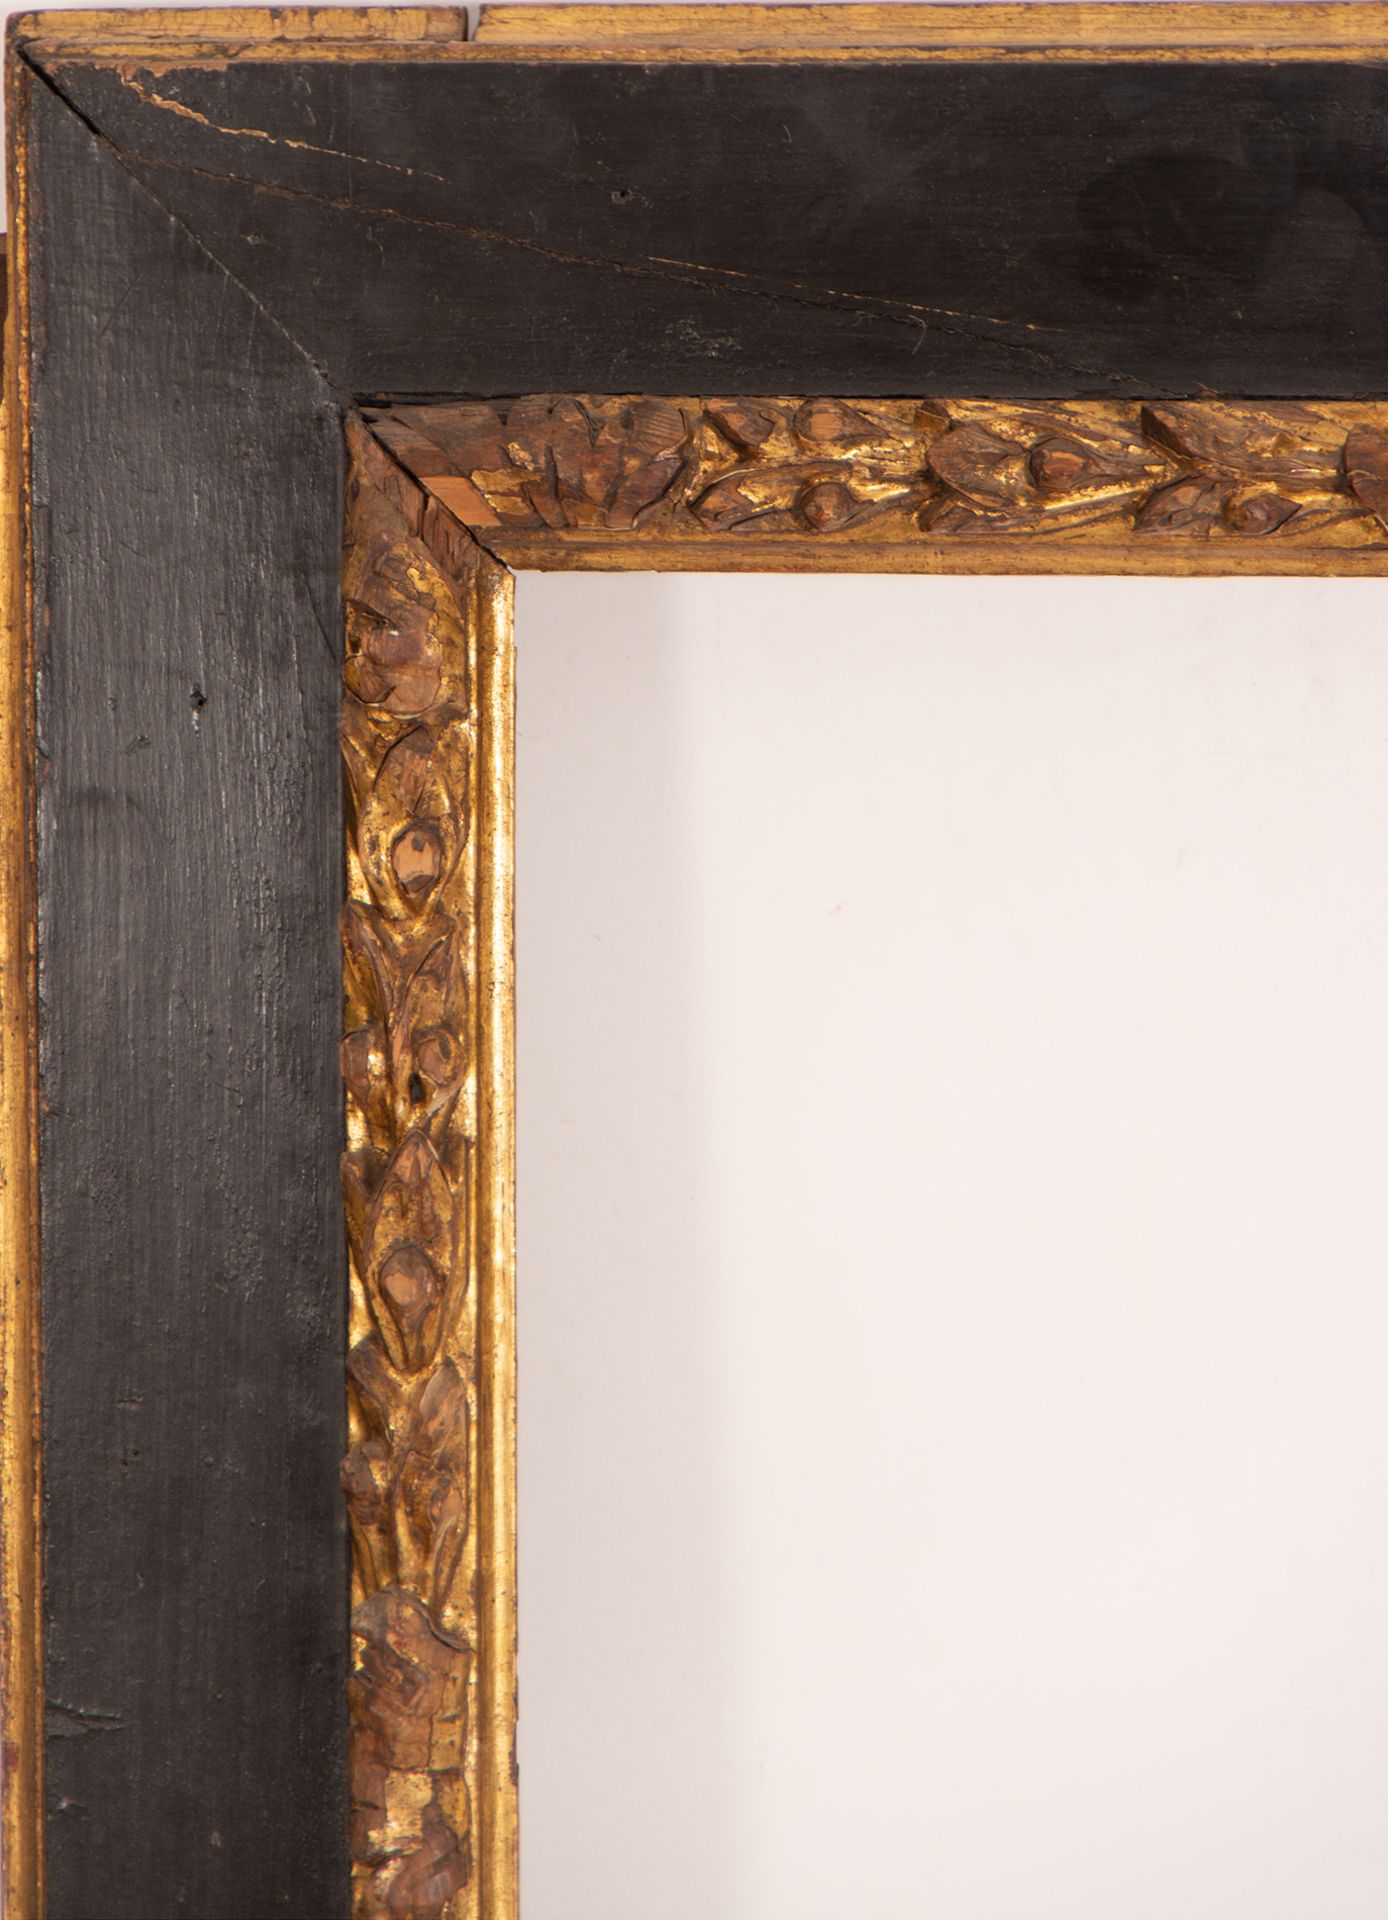 Spanish Black and Giltwood Frame, 17th - 18th centuries - Image 3 of 5